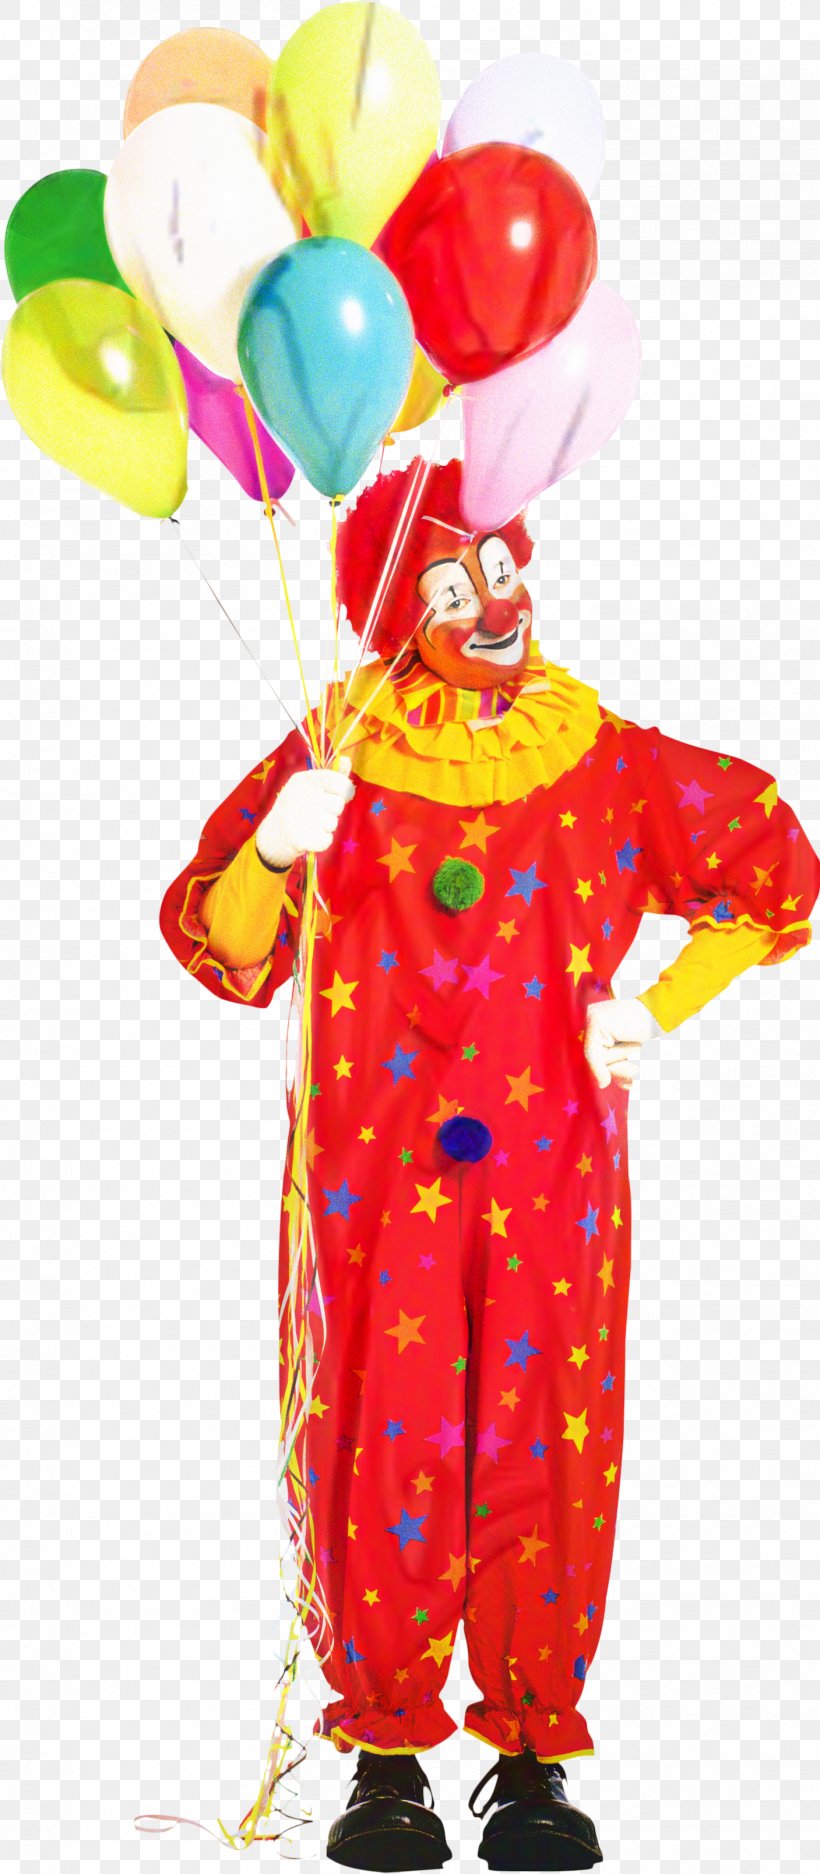 Images Cartoon, PNG, 1407x3217px, Clown, Balloon, Character, Circus, Costume Download Free